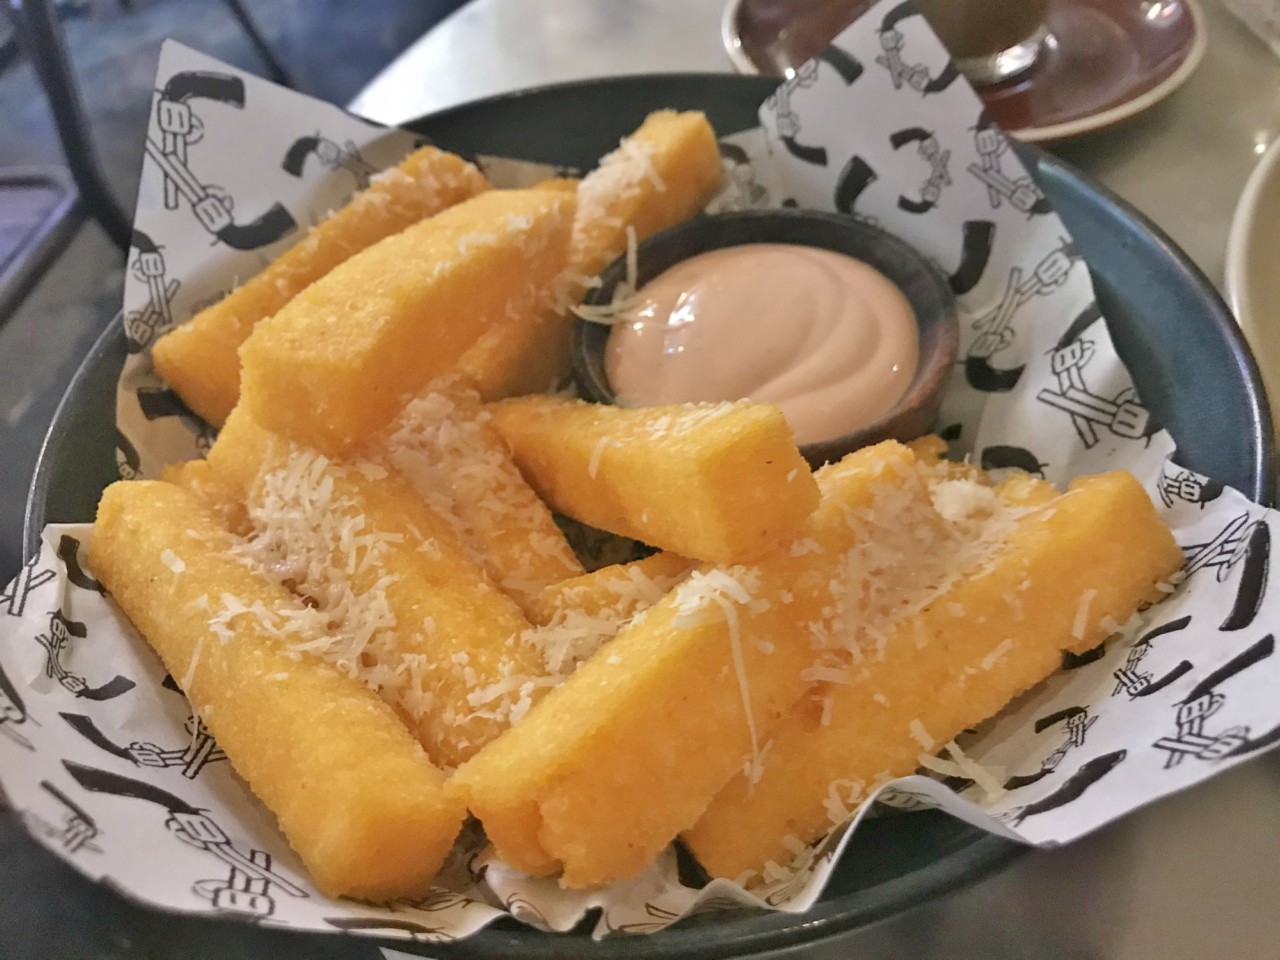 A plate of polenta fries from Revolver Coffee Shop in Saminyak Bali